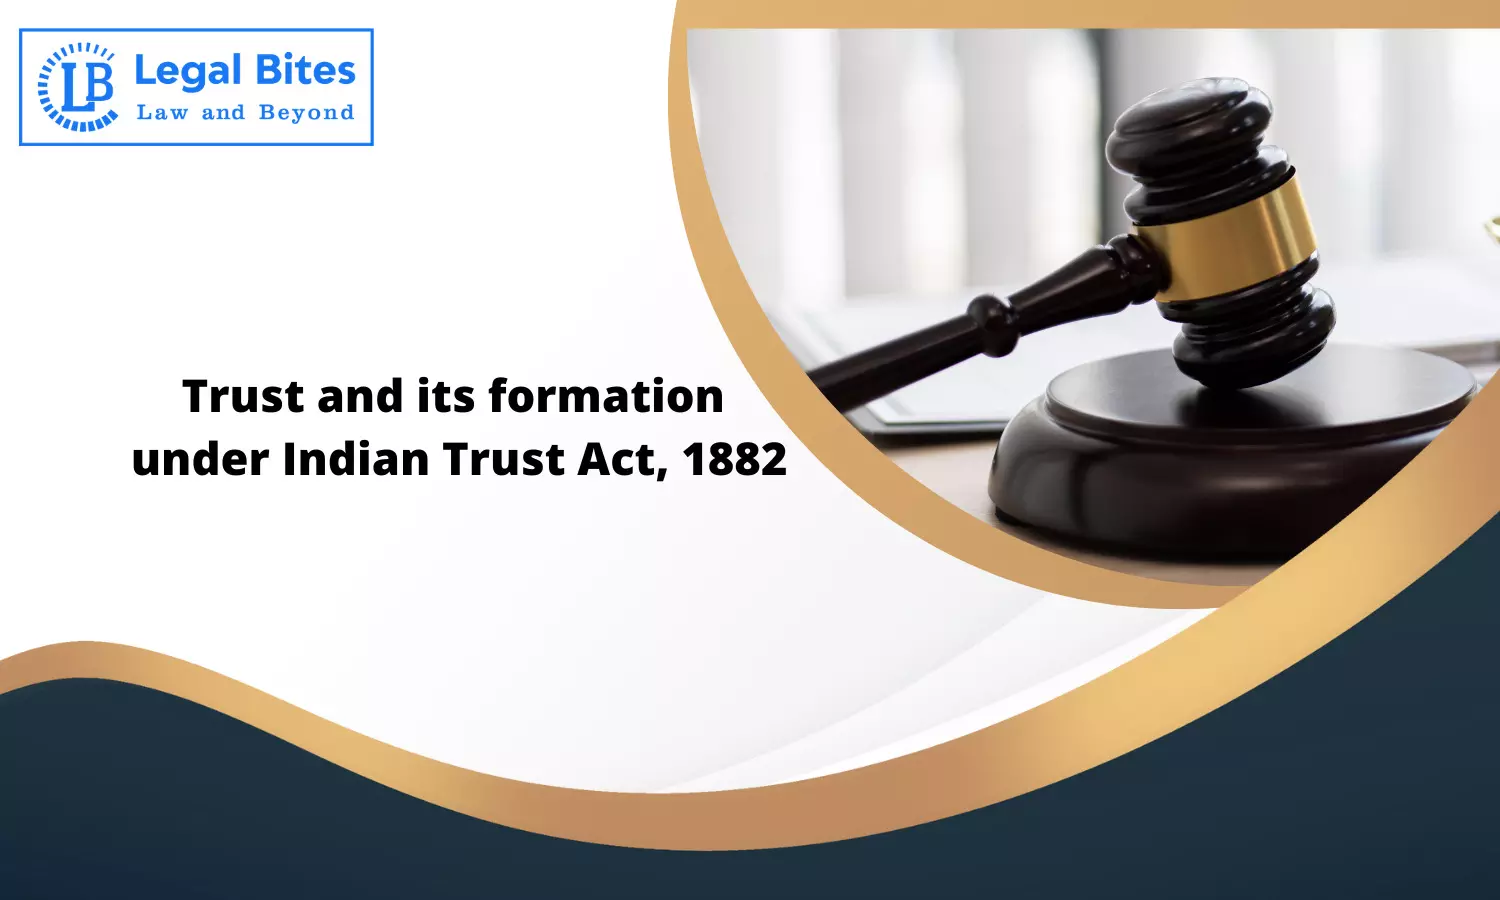 Trust and its formation under Indian Trust Act, 1882